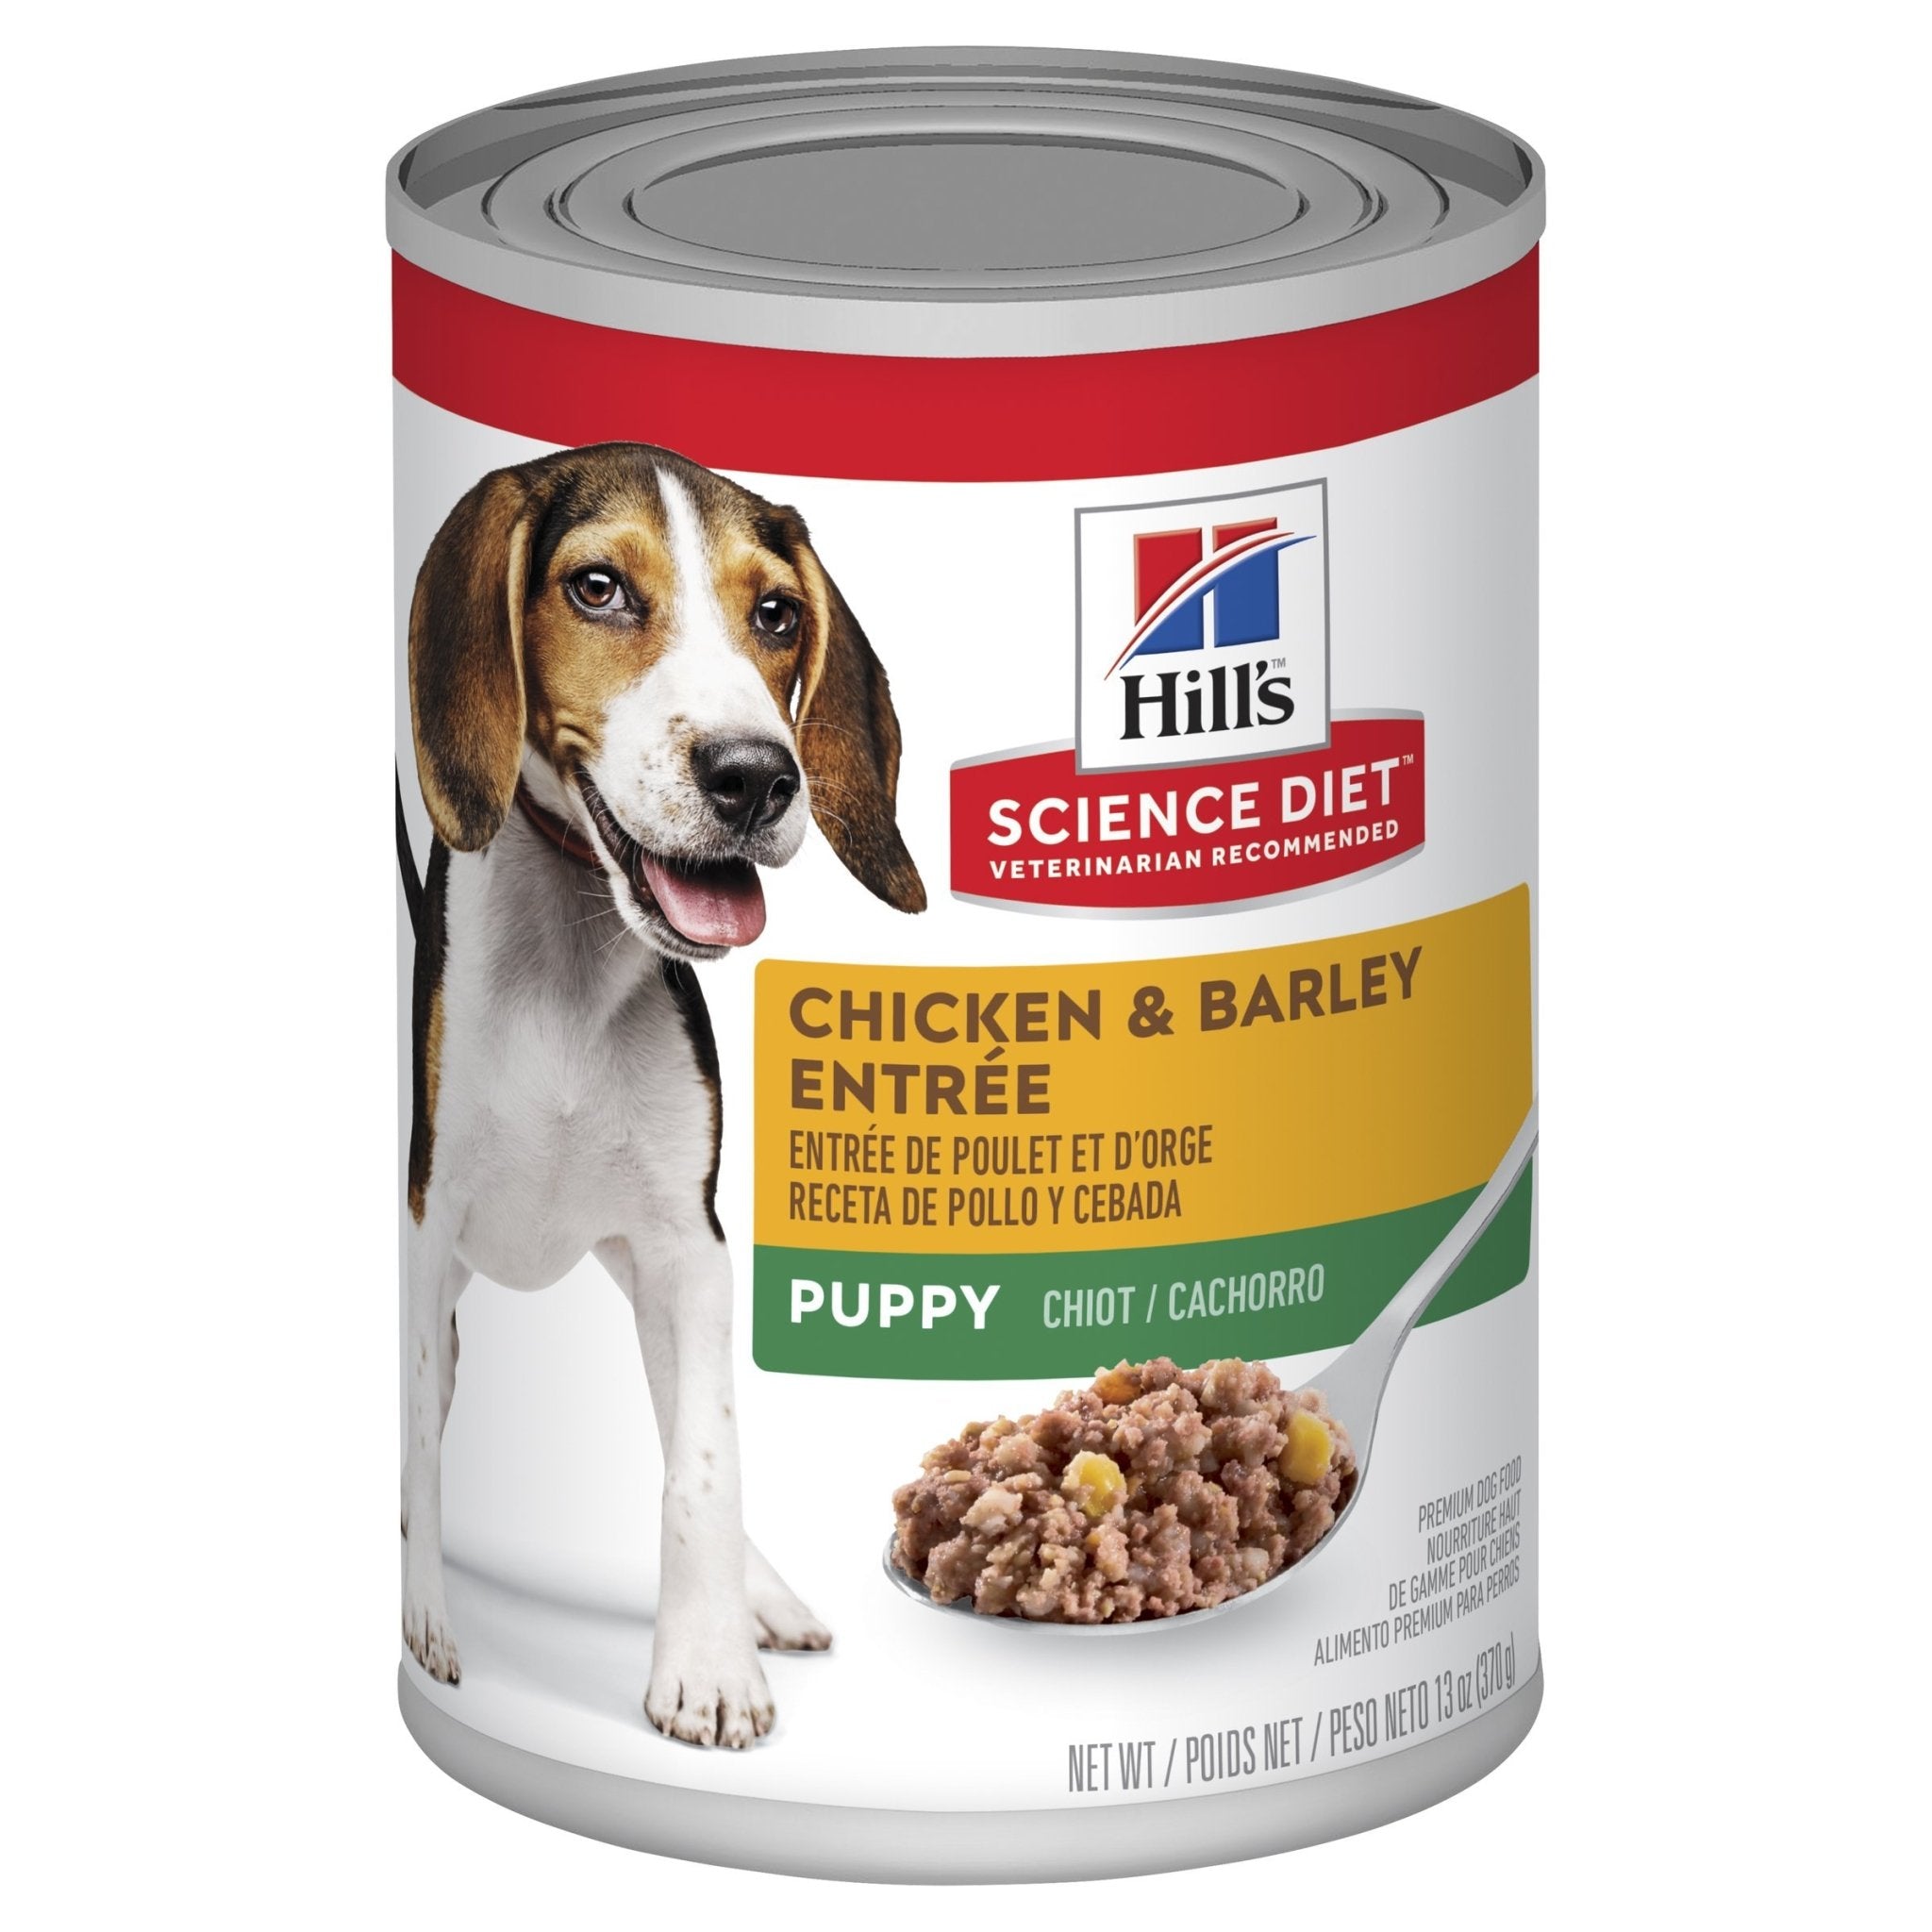 Hill's Science Diet Puppy Chicken & Barley Entrée Canned Dog Food, 370g, 12 Pack